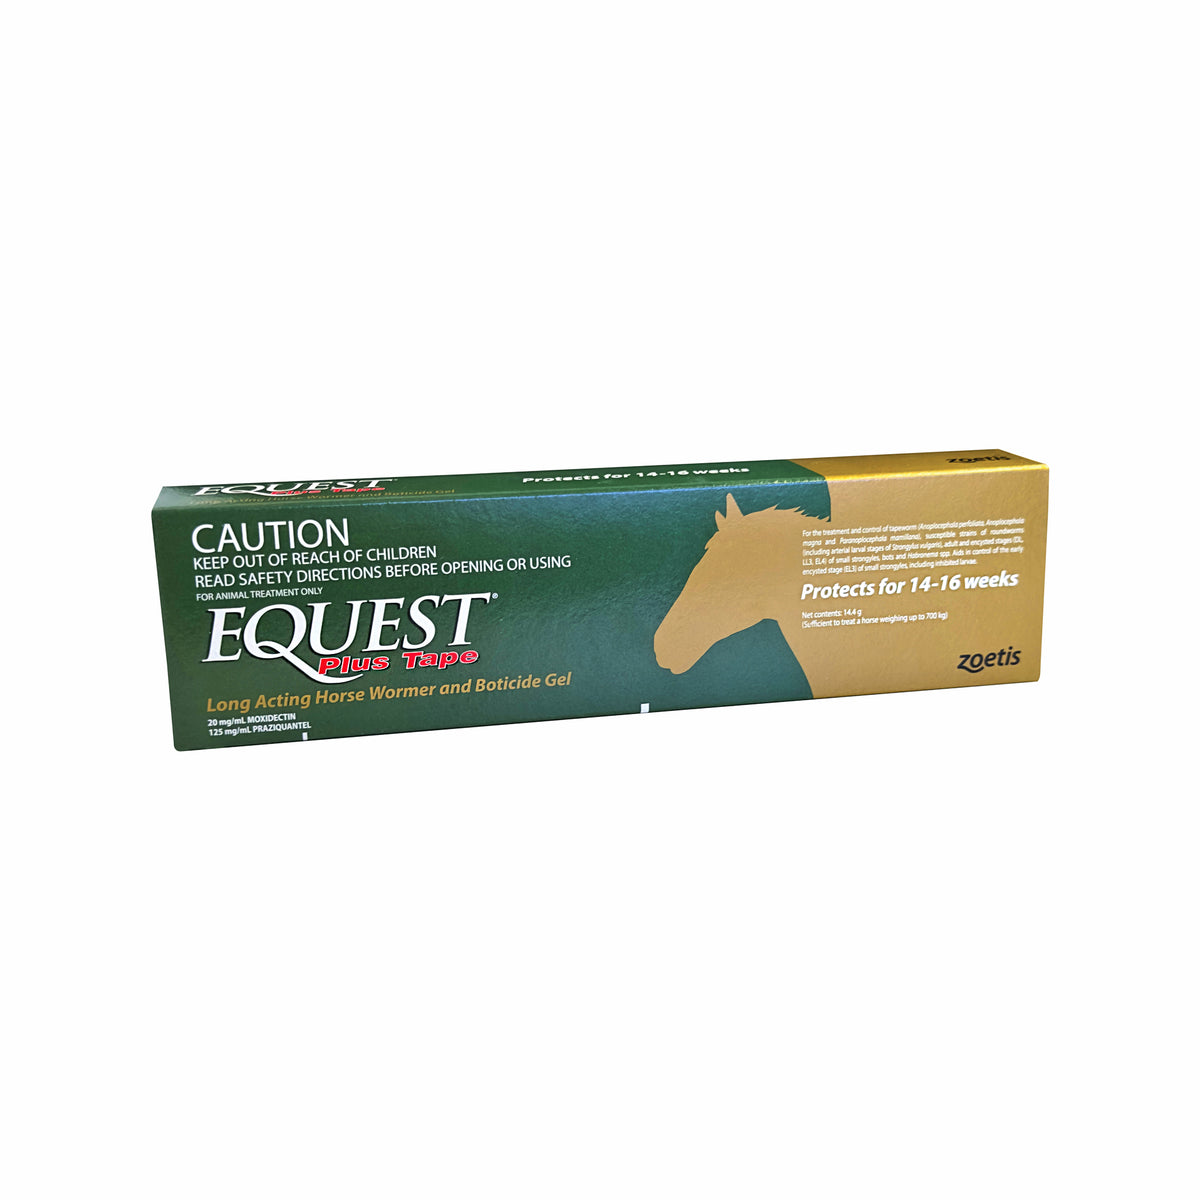 Equest Plus Tape Long Acting Horse Wormer and Boticide Gel 14.4g